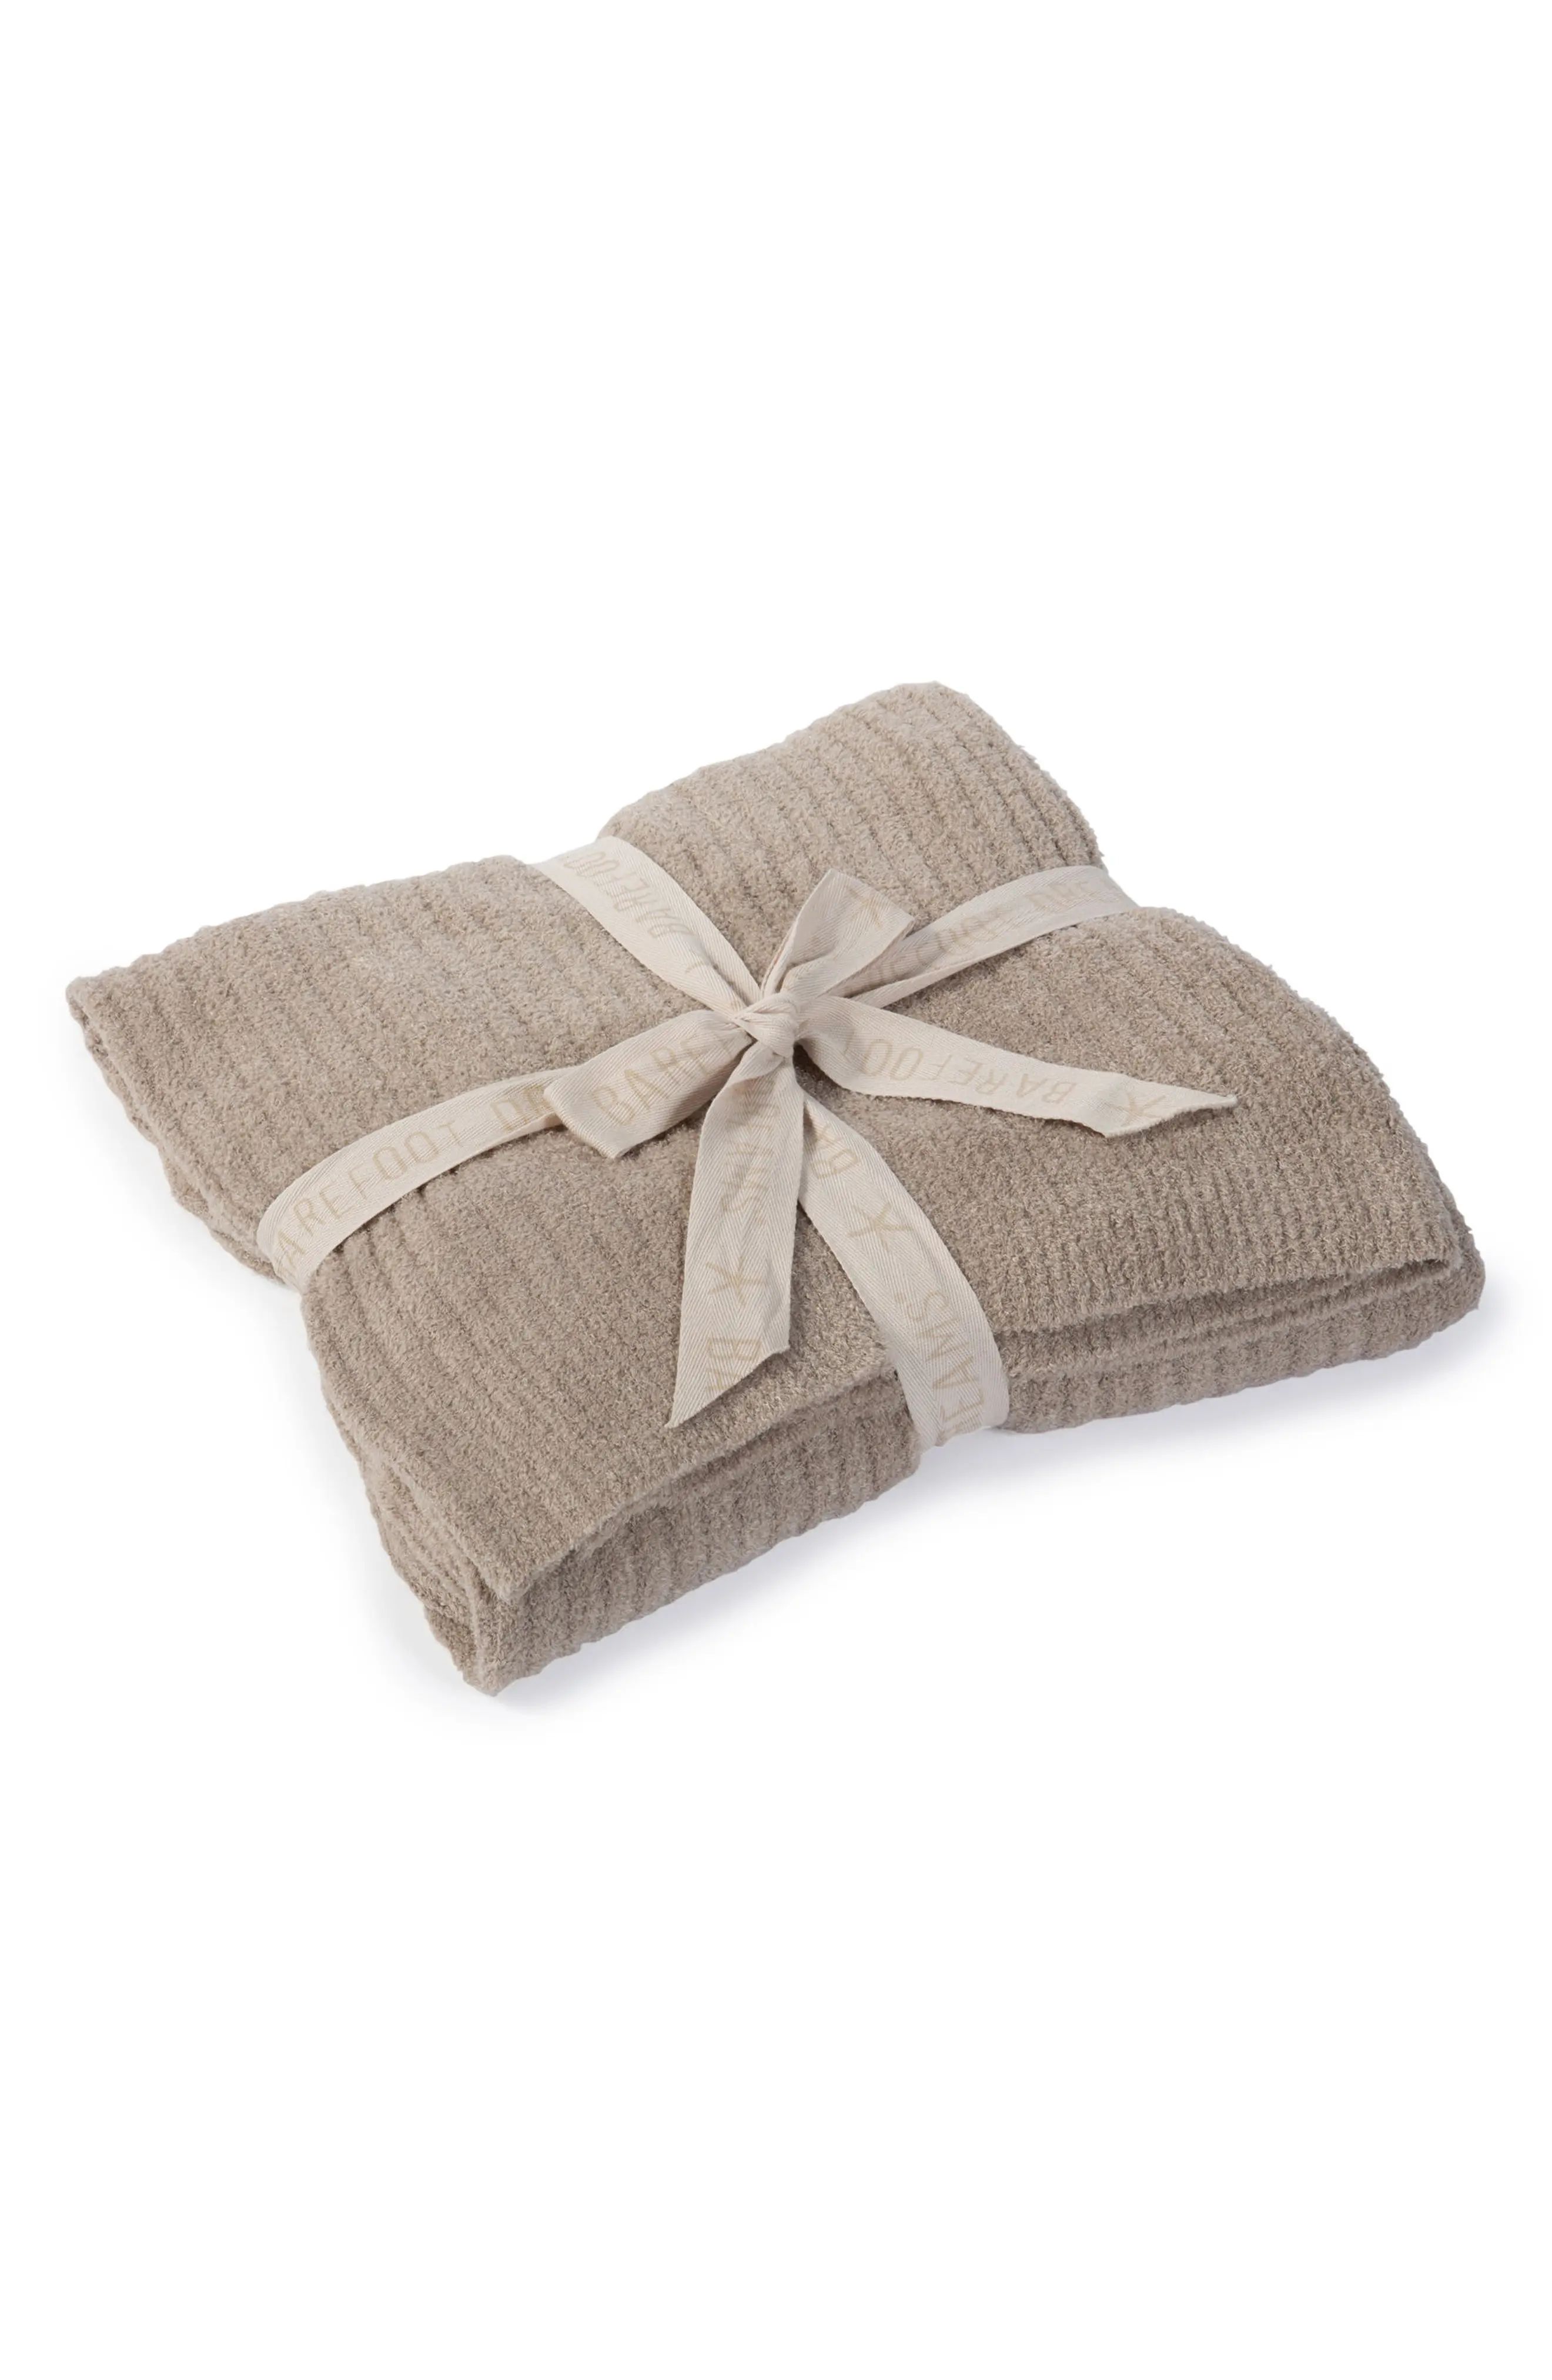 Barefoot Dreams Cozychic Light Ribbed Throw, Size One Size - Beige | Nordstrom